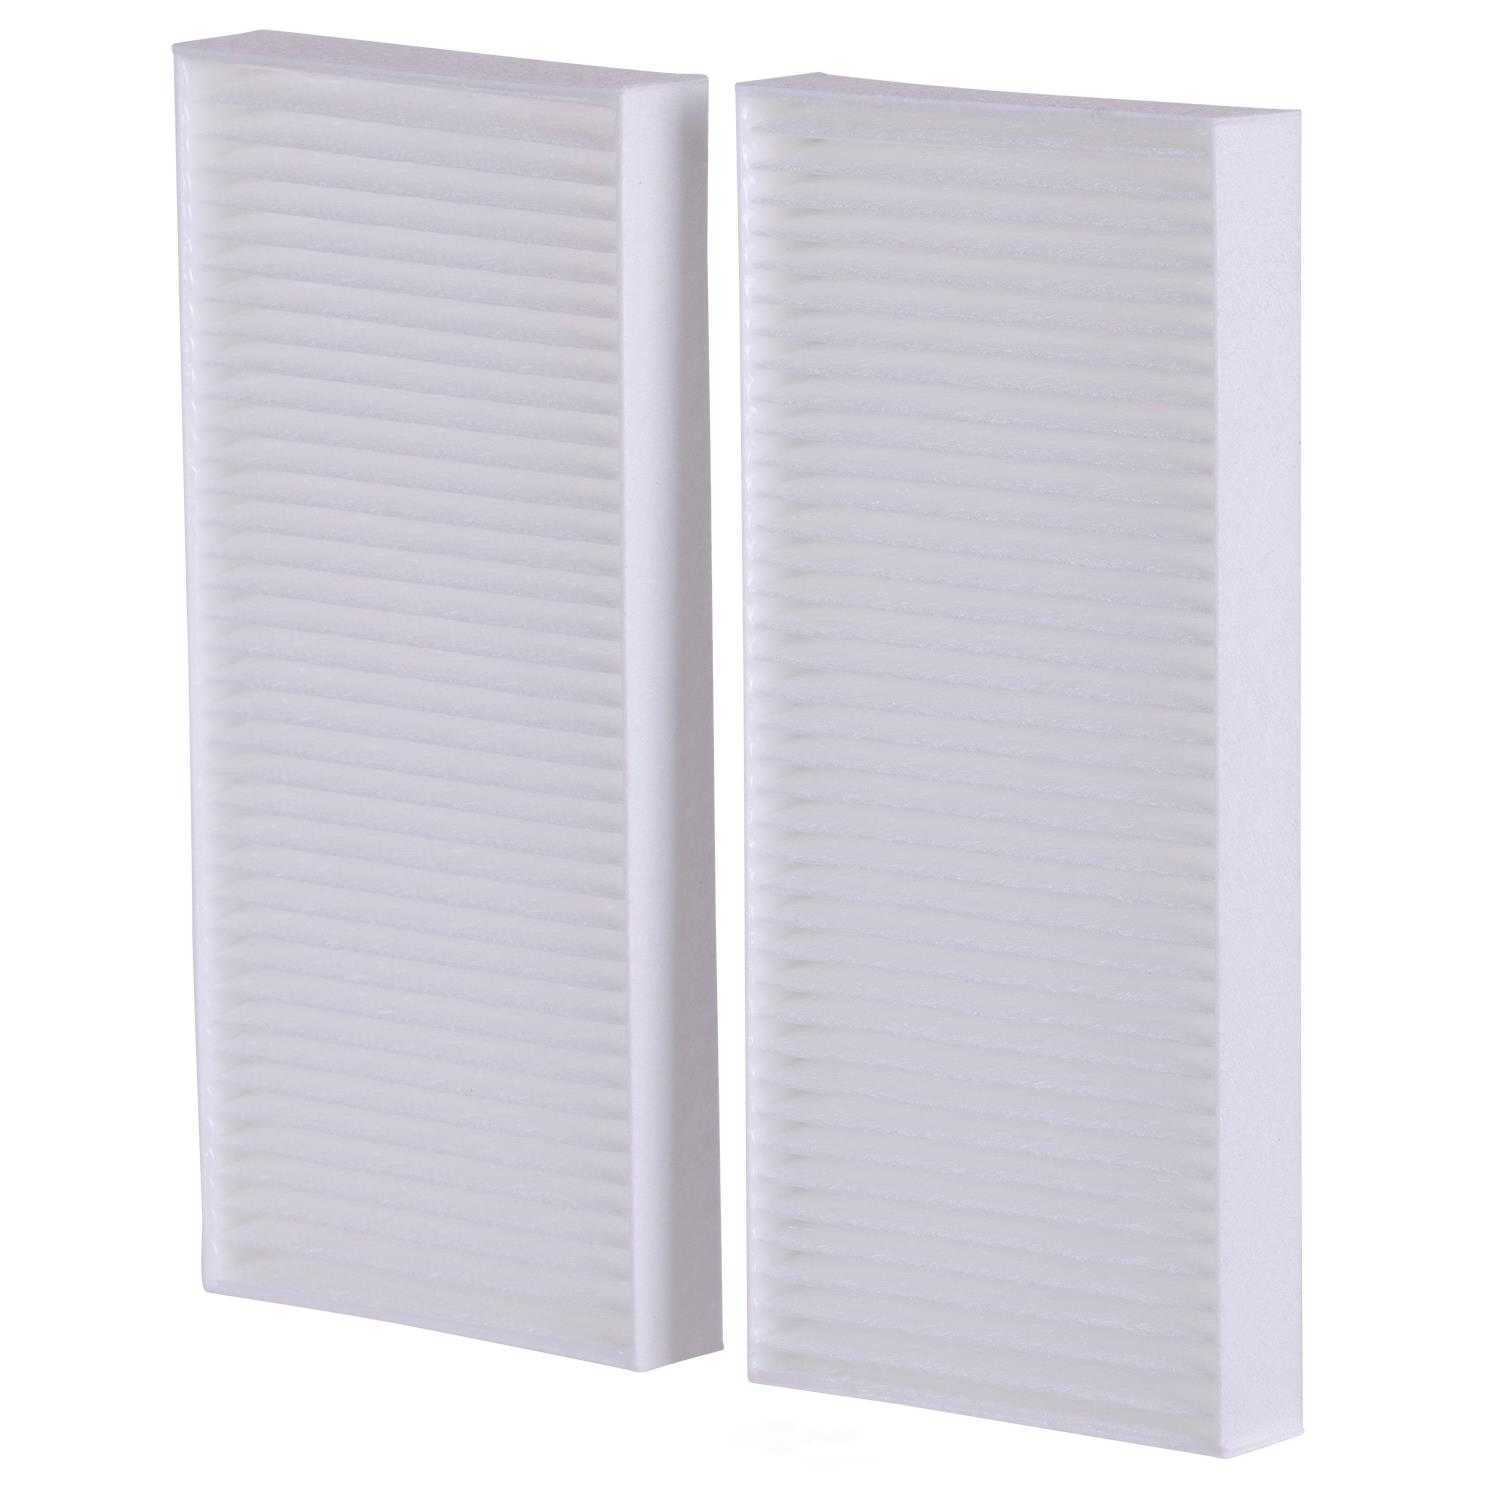 PARTS PLUS FILTERS BY PREMIUM GUARD - Particulate Media - PLF CAF1043